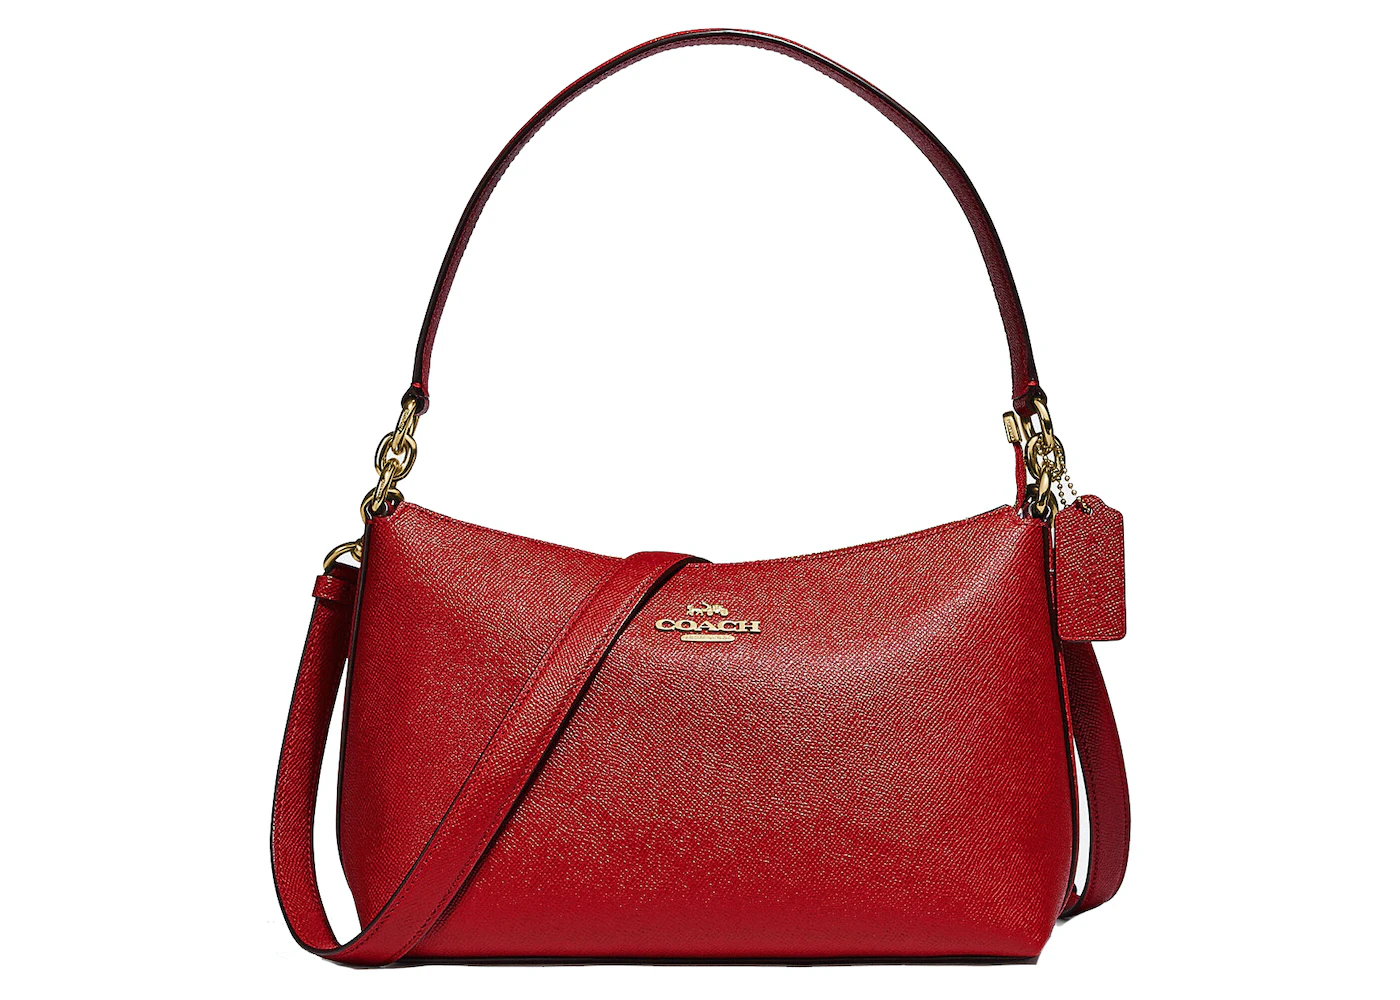 Coach Lewis Shoulder Bag Classic Leather Red in Crossgrain Leather